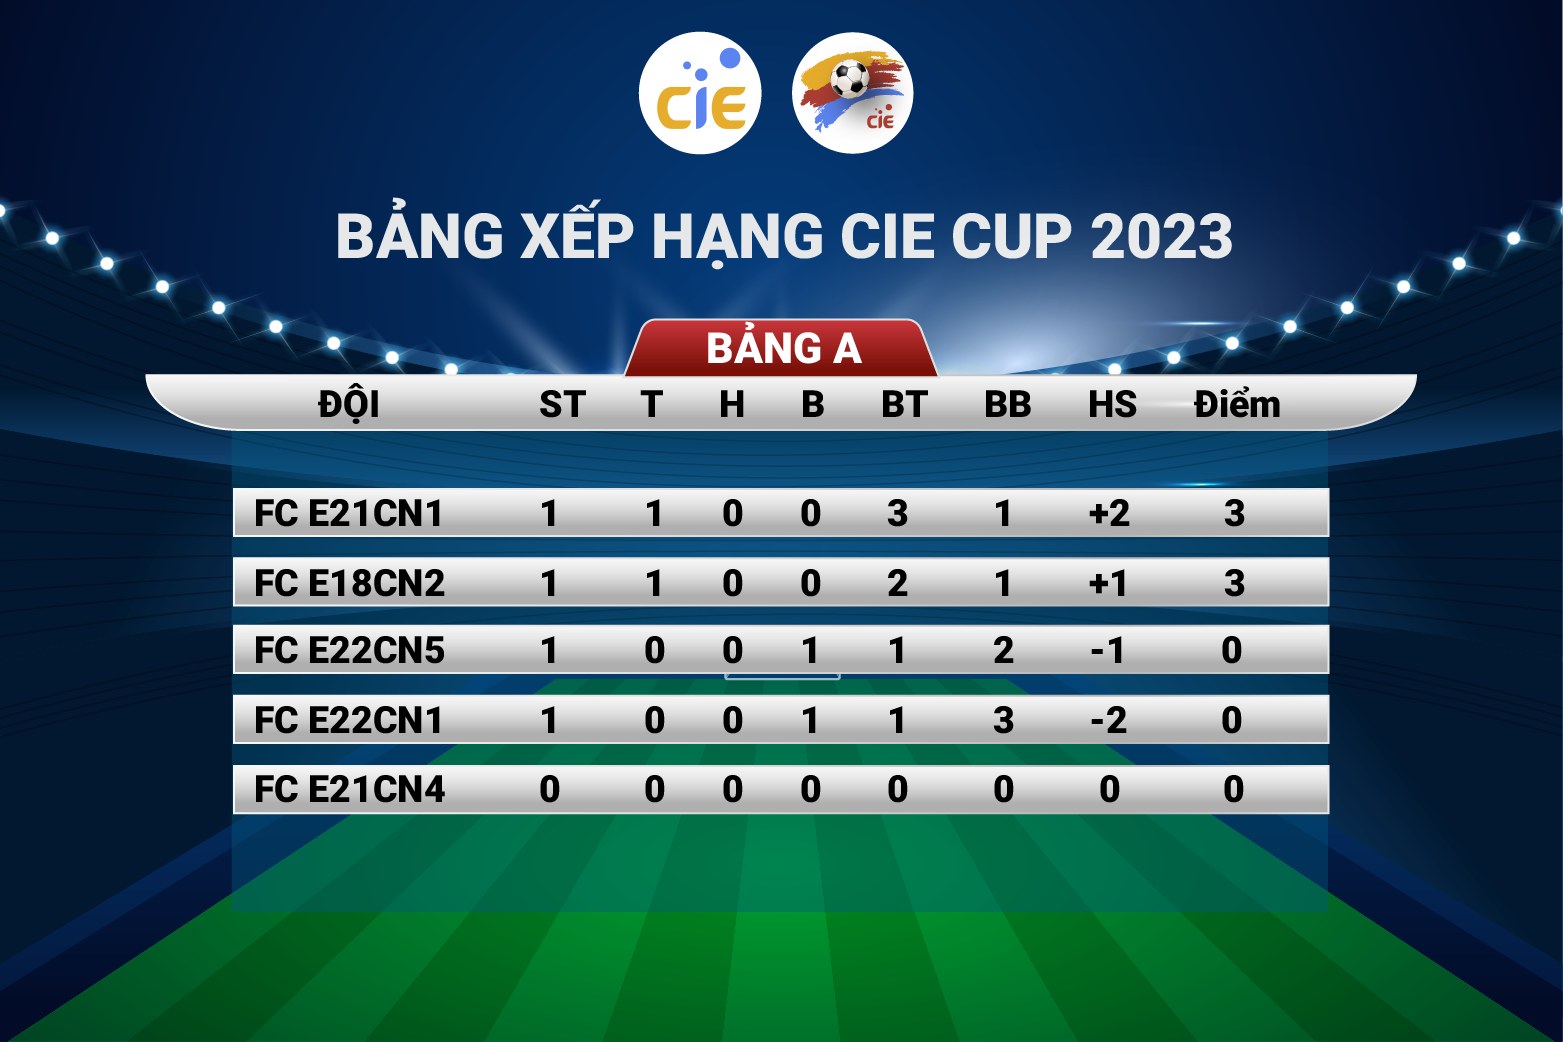 CIE CUP 2023 Rankings of table A